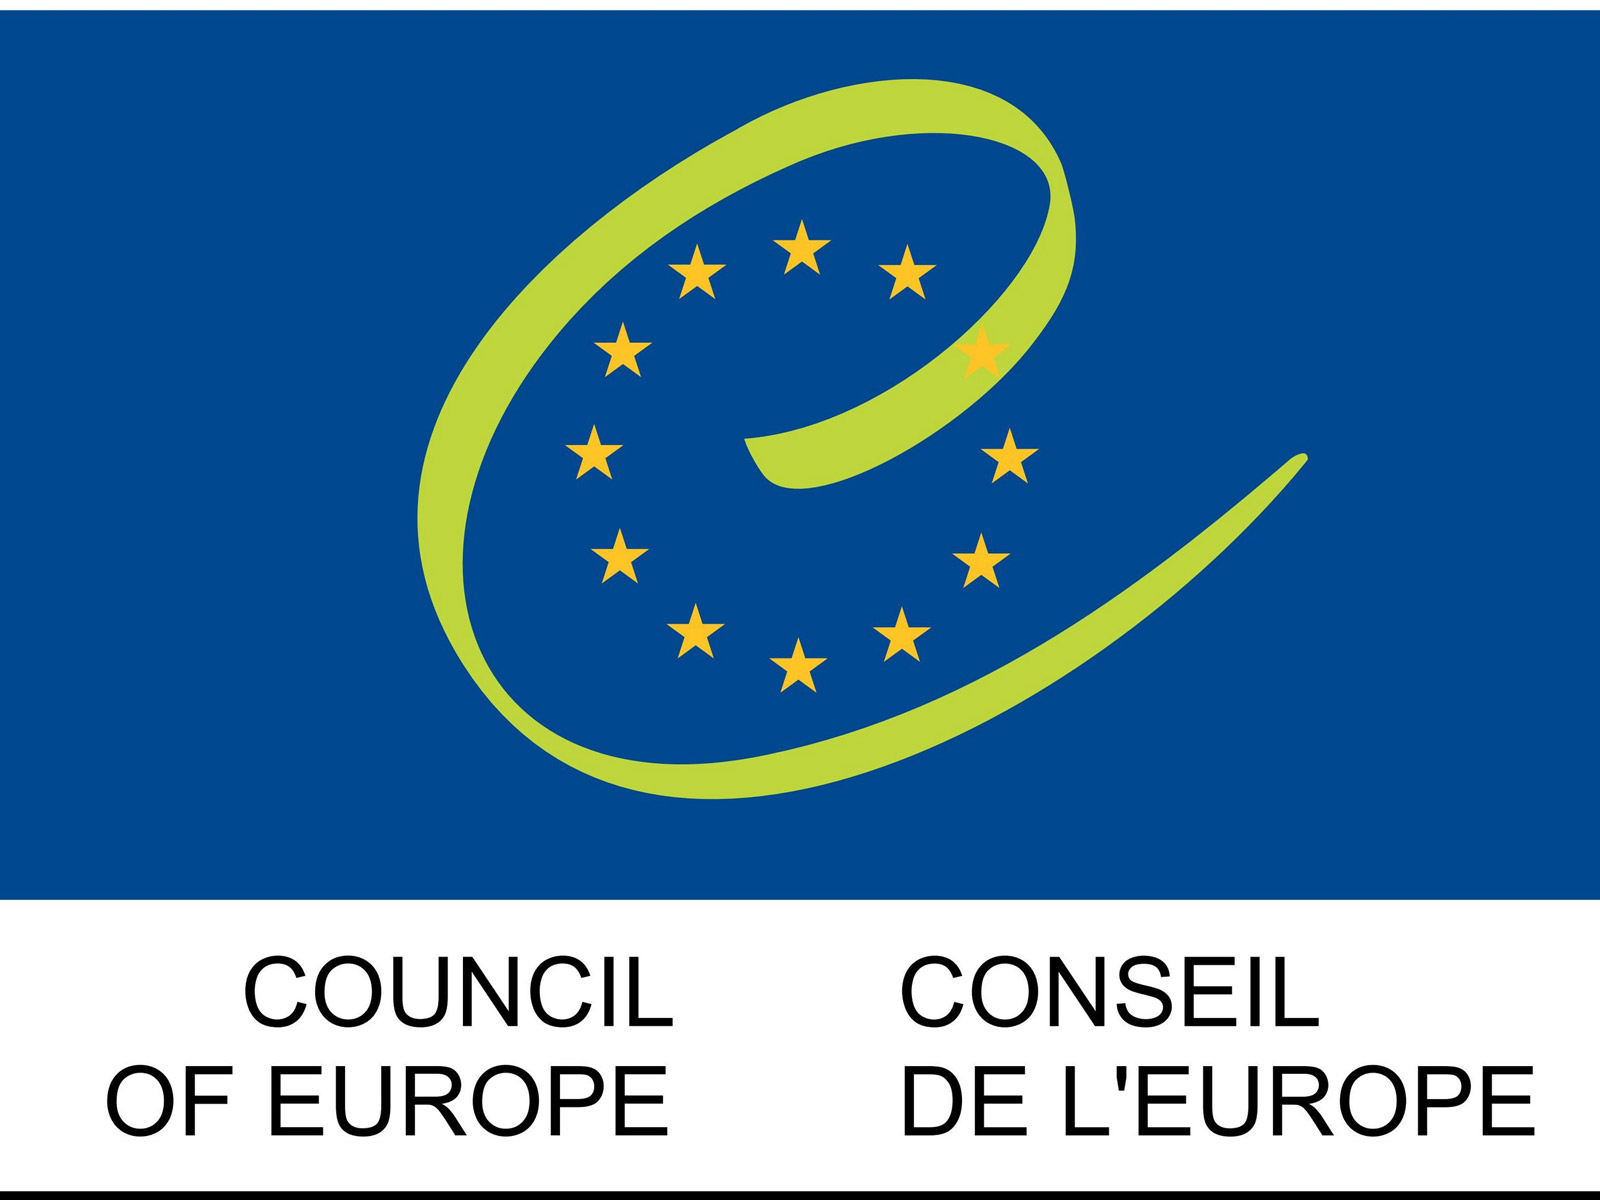 Remarks of the CoE Committee on Violation of European Social Charter Acts Still Valid 